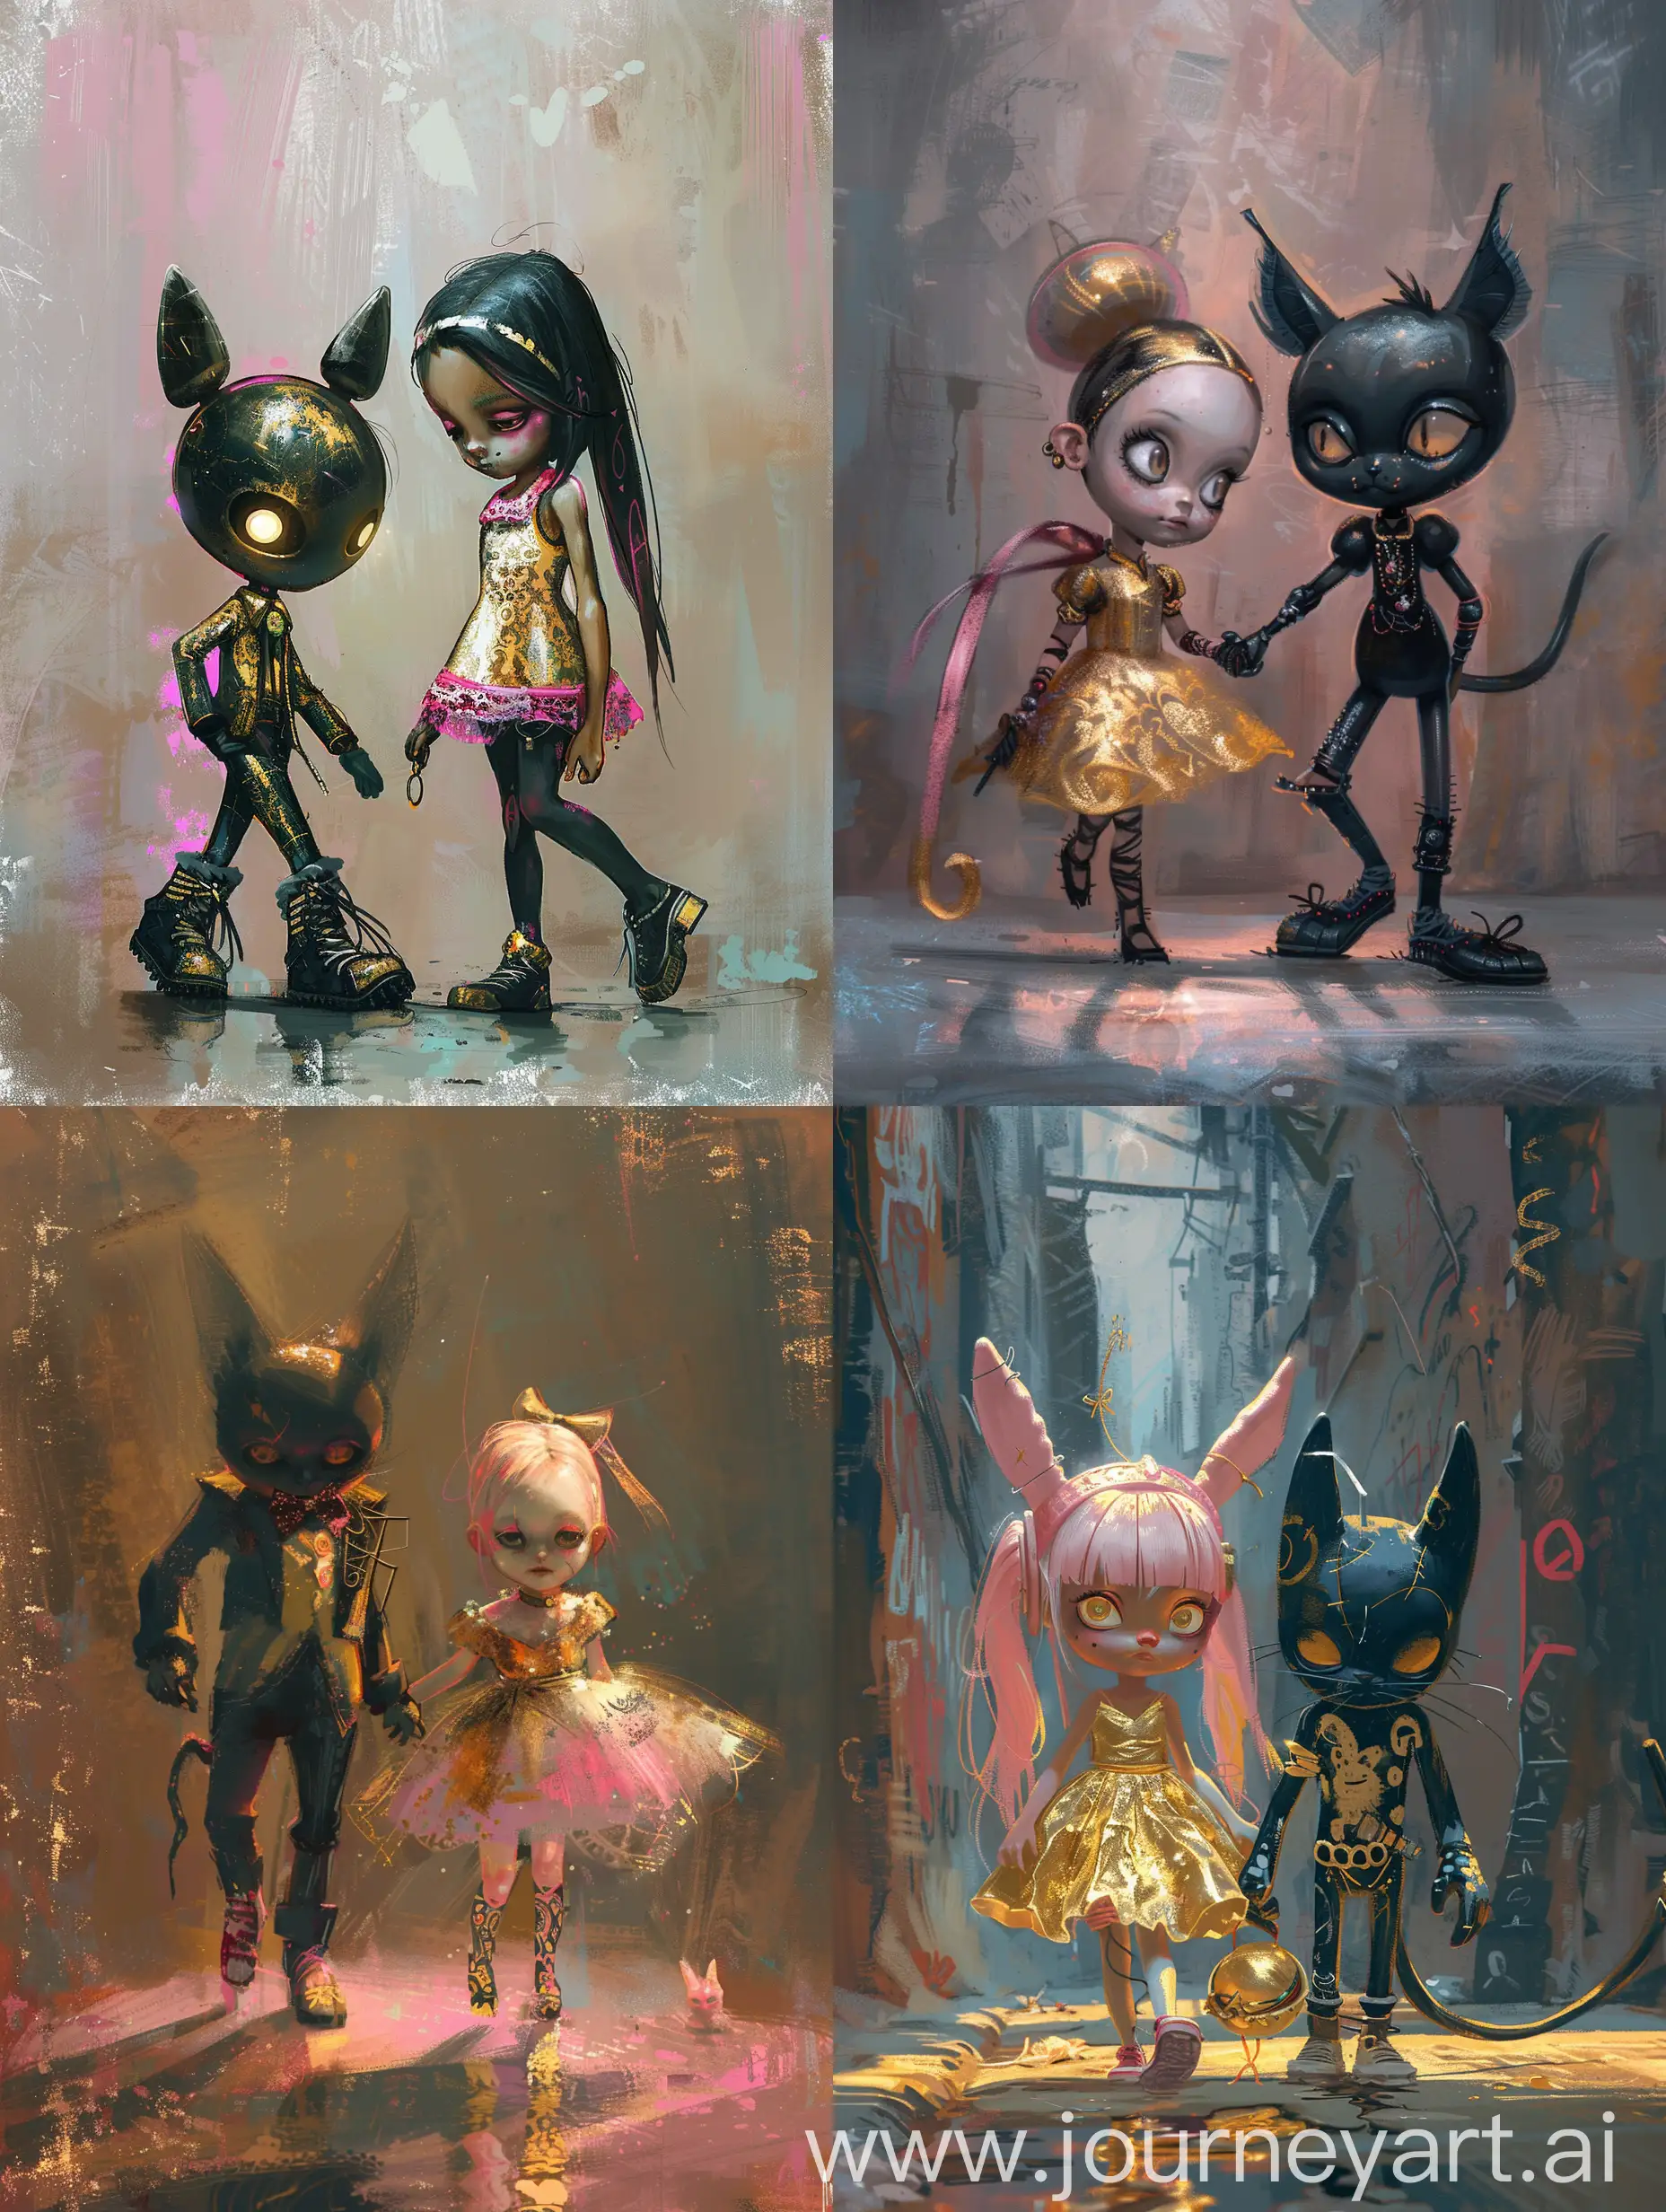 Enchanting-Little-Punk-Girl-Walking-with-Panther-A-Collaboration-by-Chiara-Bautista-and-James-Jean